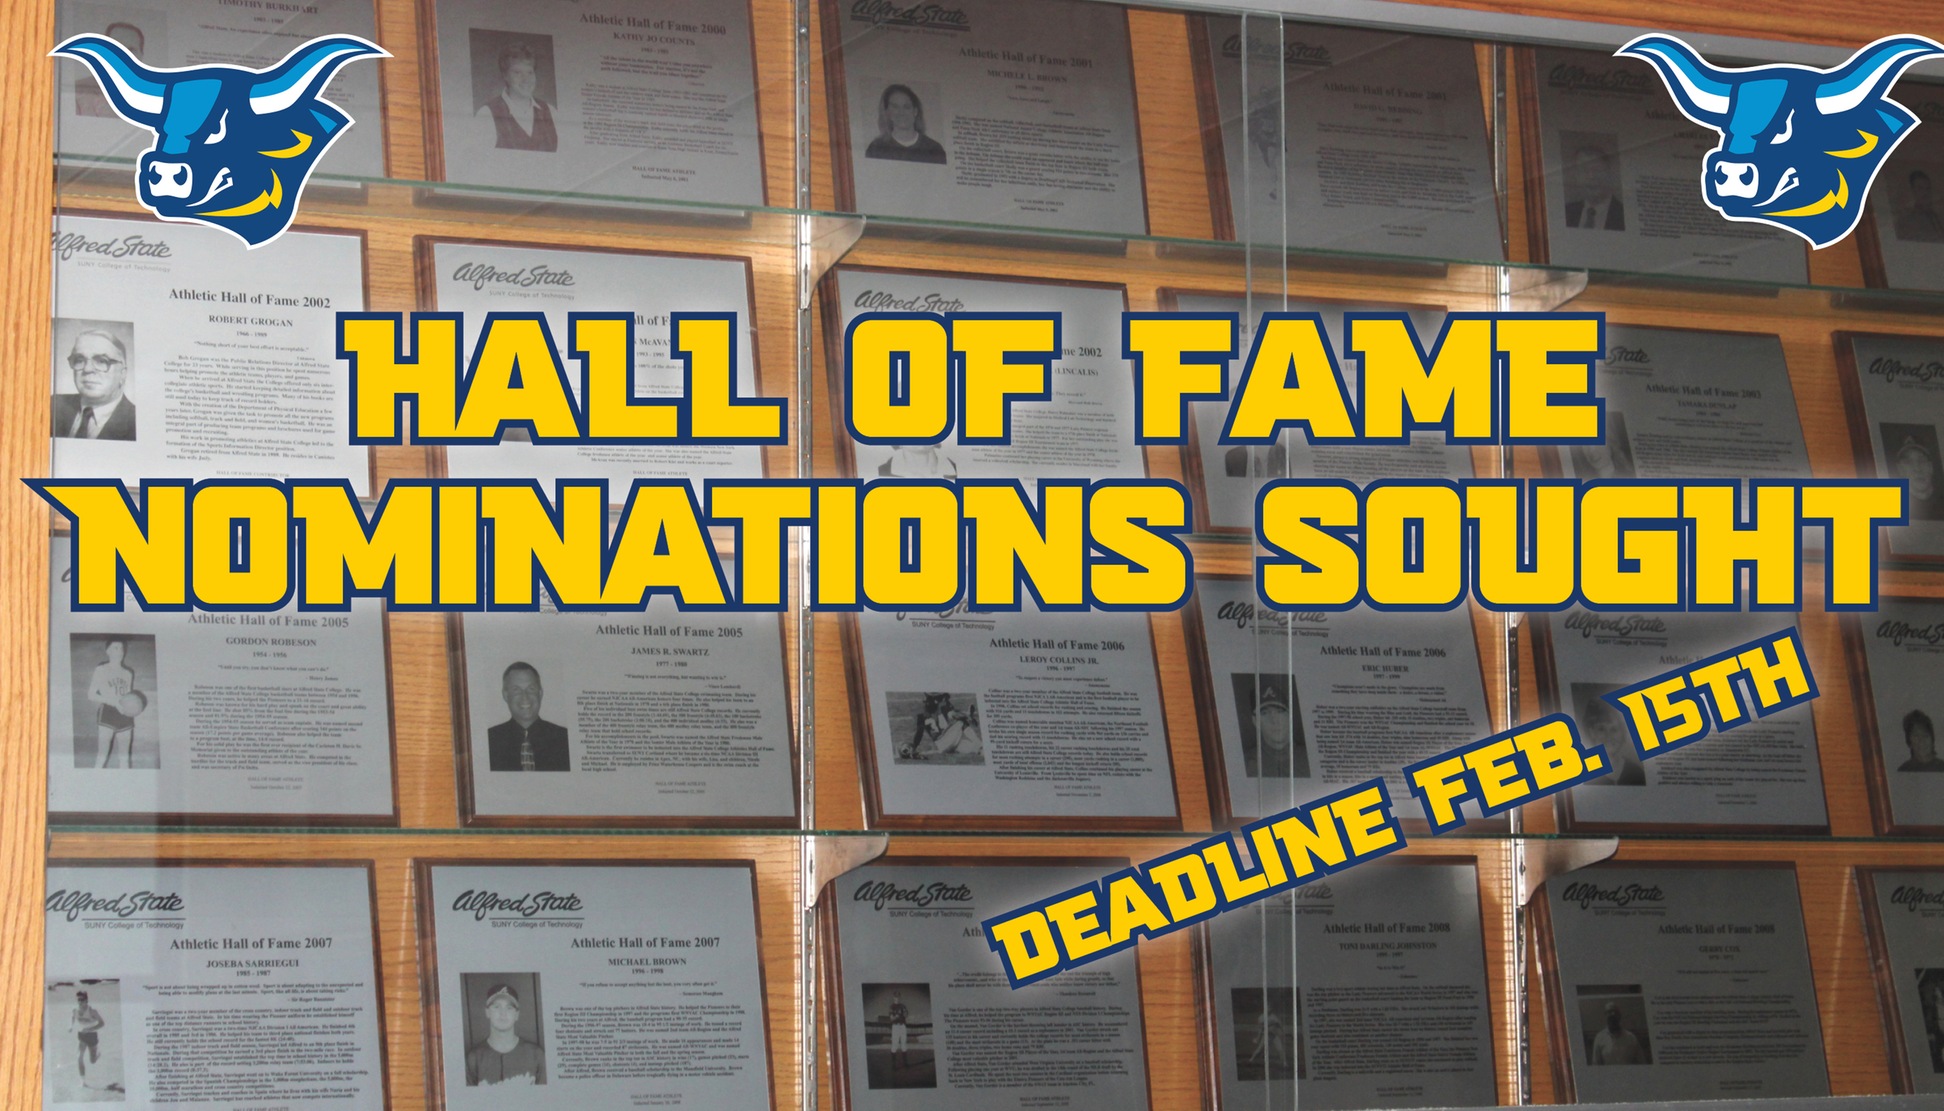 Hall of Fame Nominations Sought